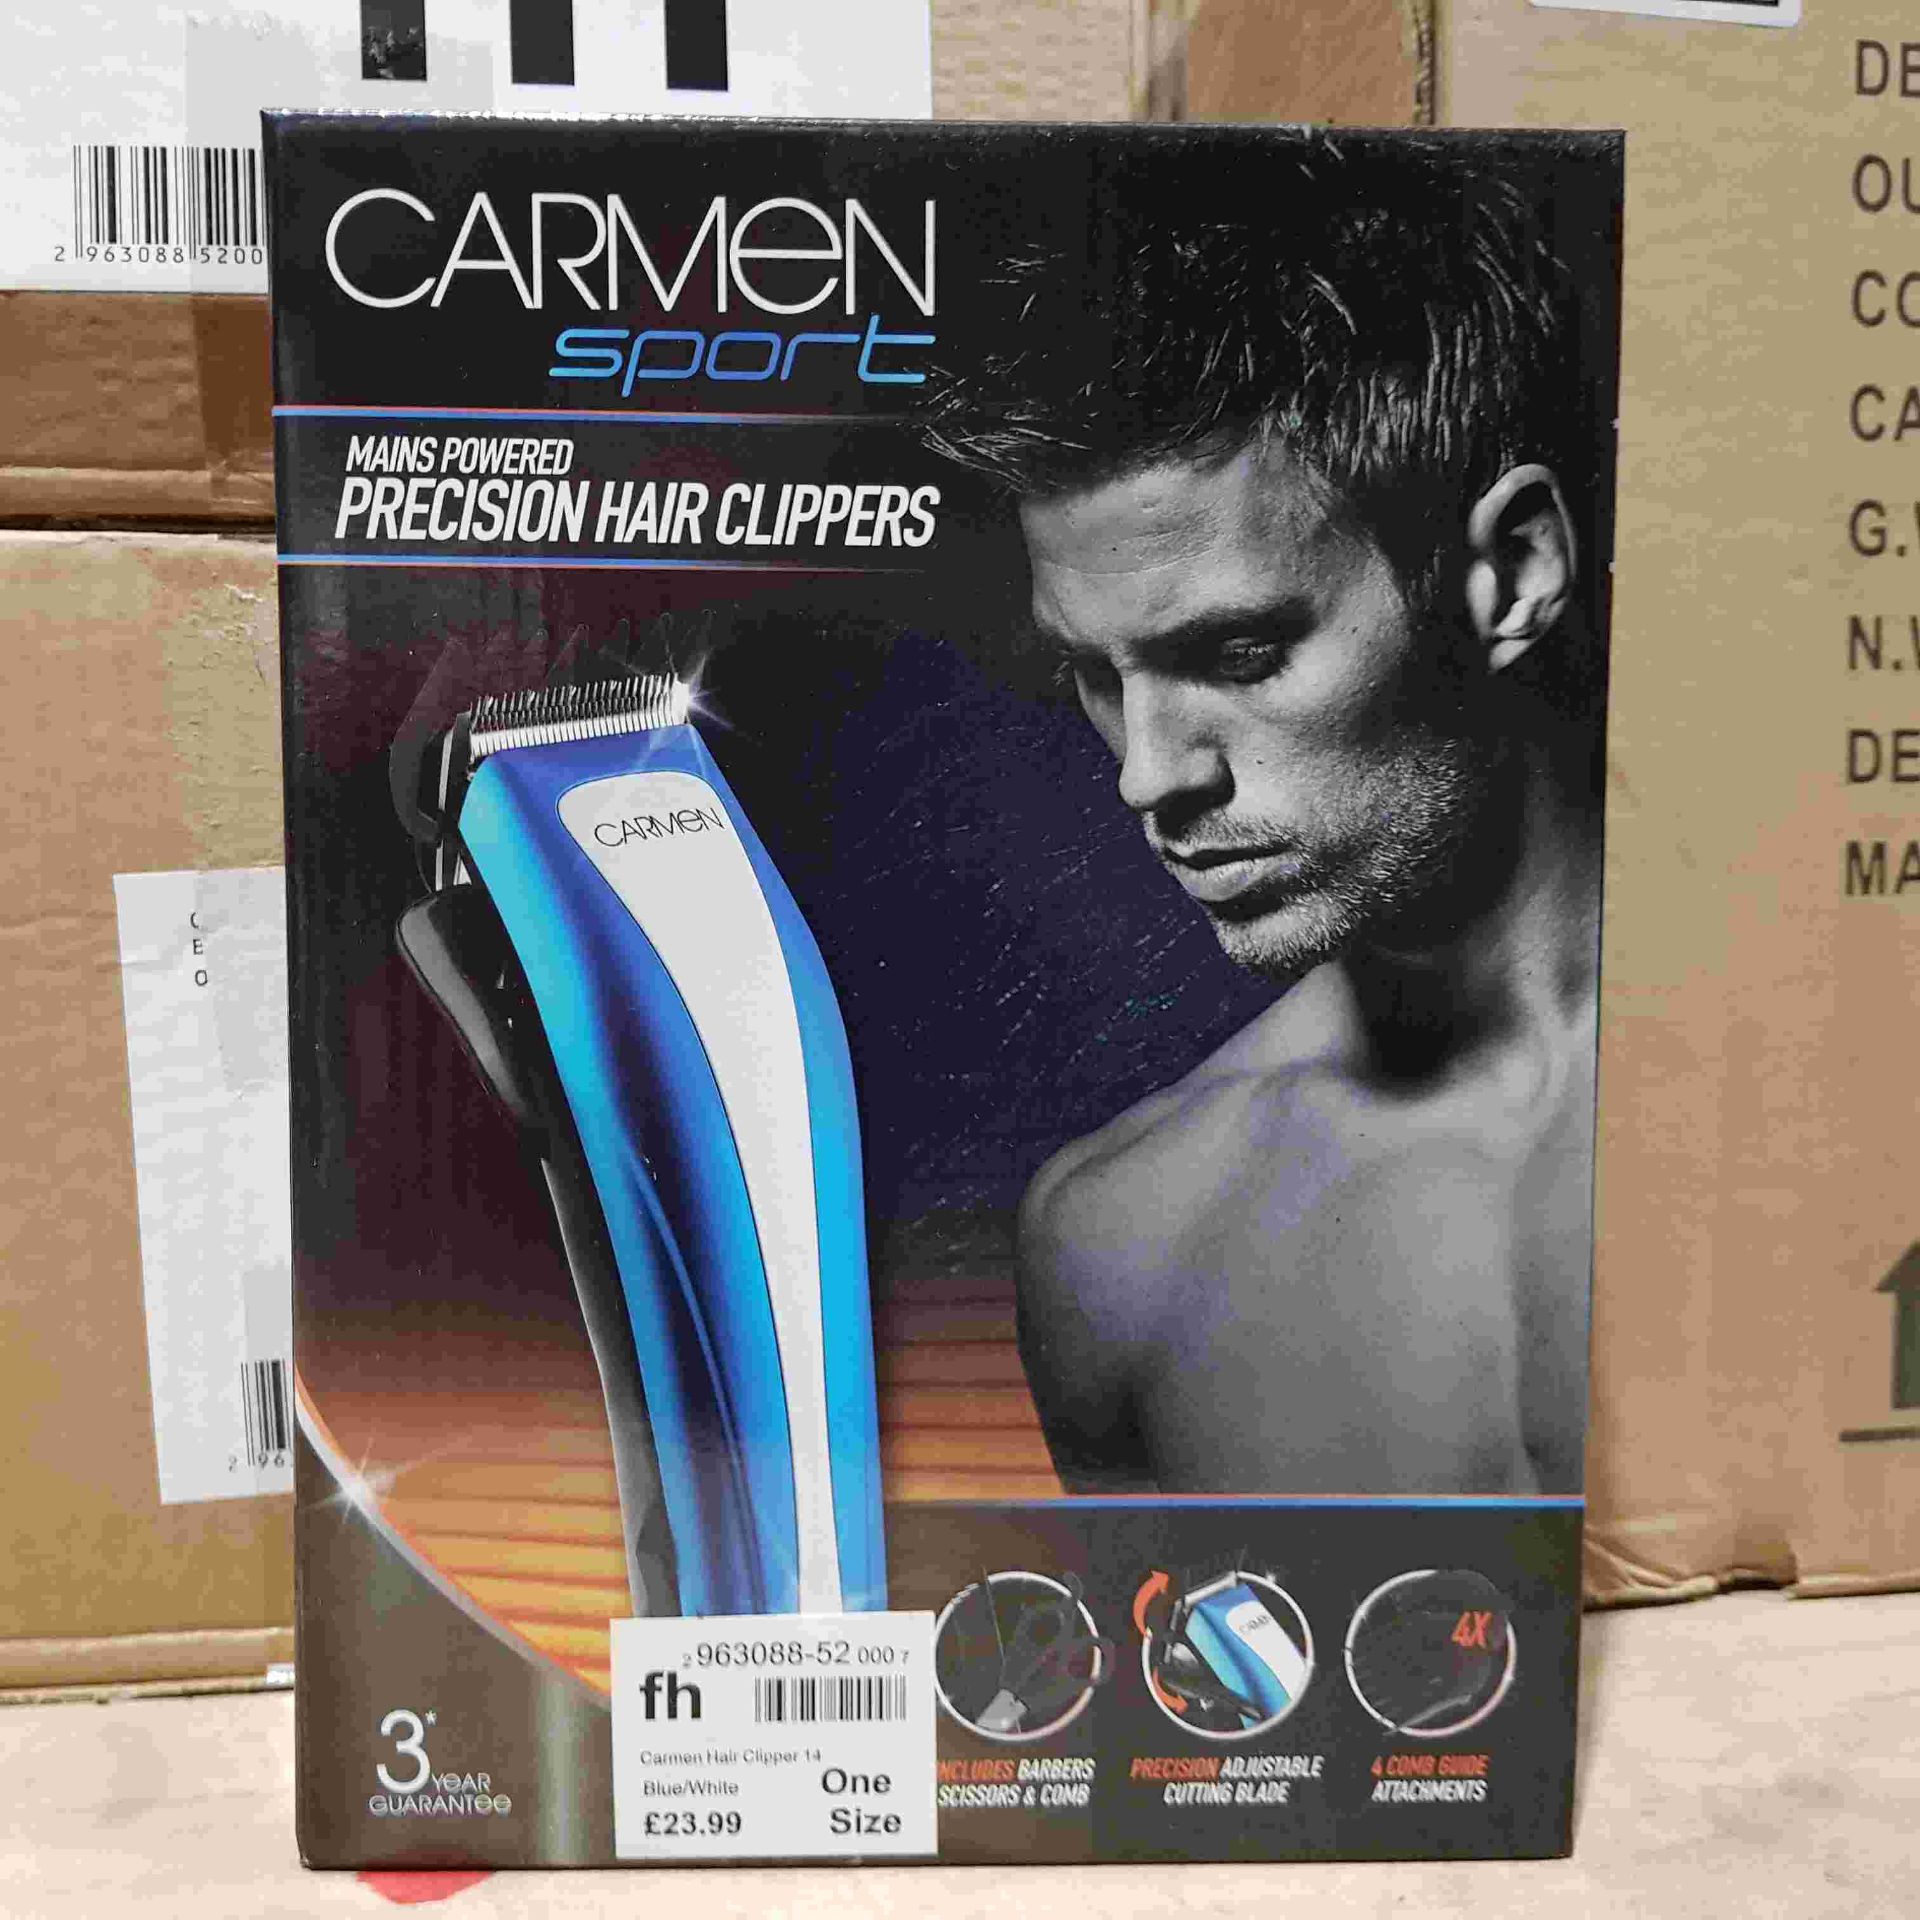 25 X BRAND NEW CARMEN SPORT MAINS POWERED PRECISON HAIR CLIPPERS - INCLUDES BARBER SCISSORS AND COMB